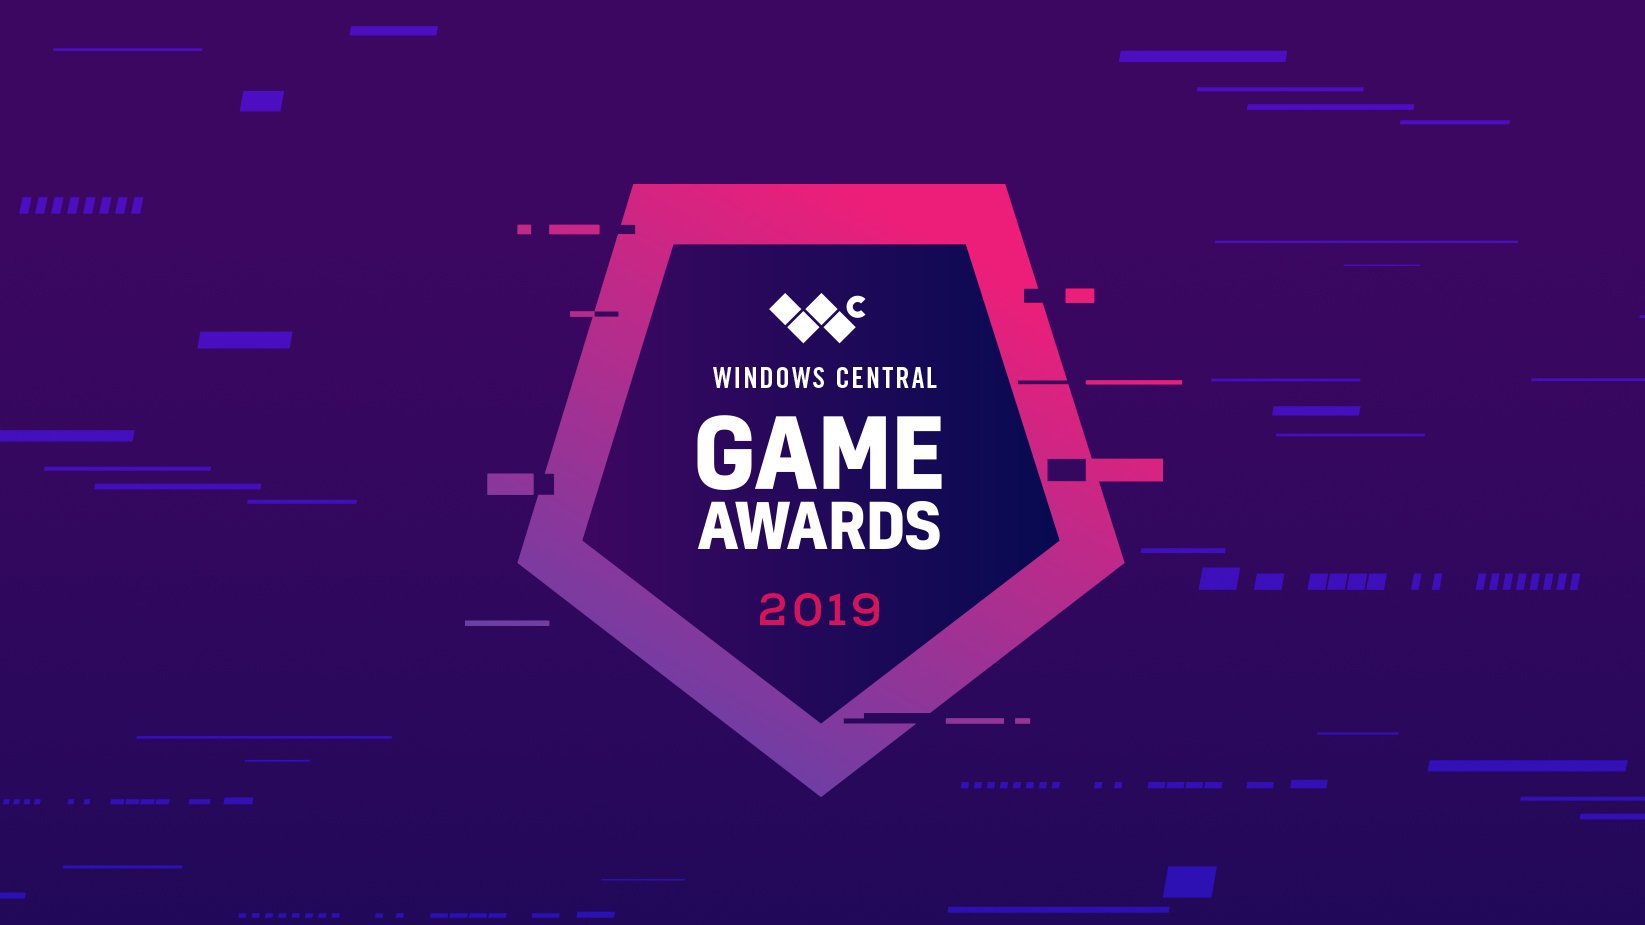 WellPlayed's Games of the Year 2019